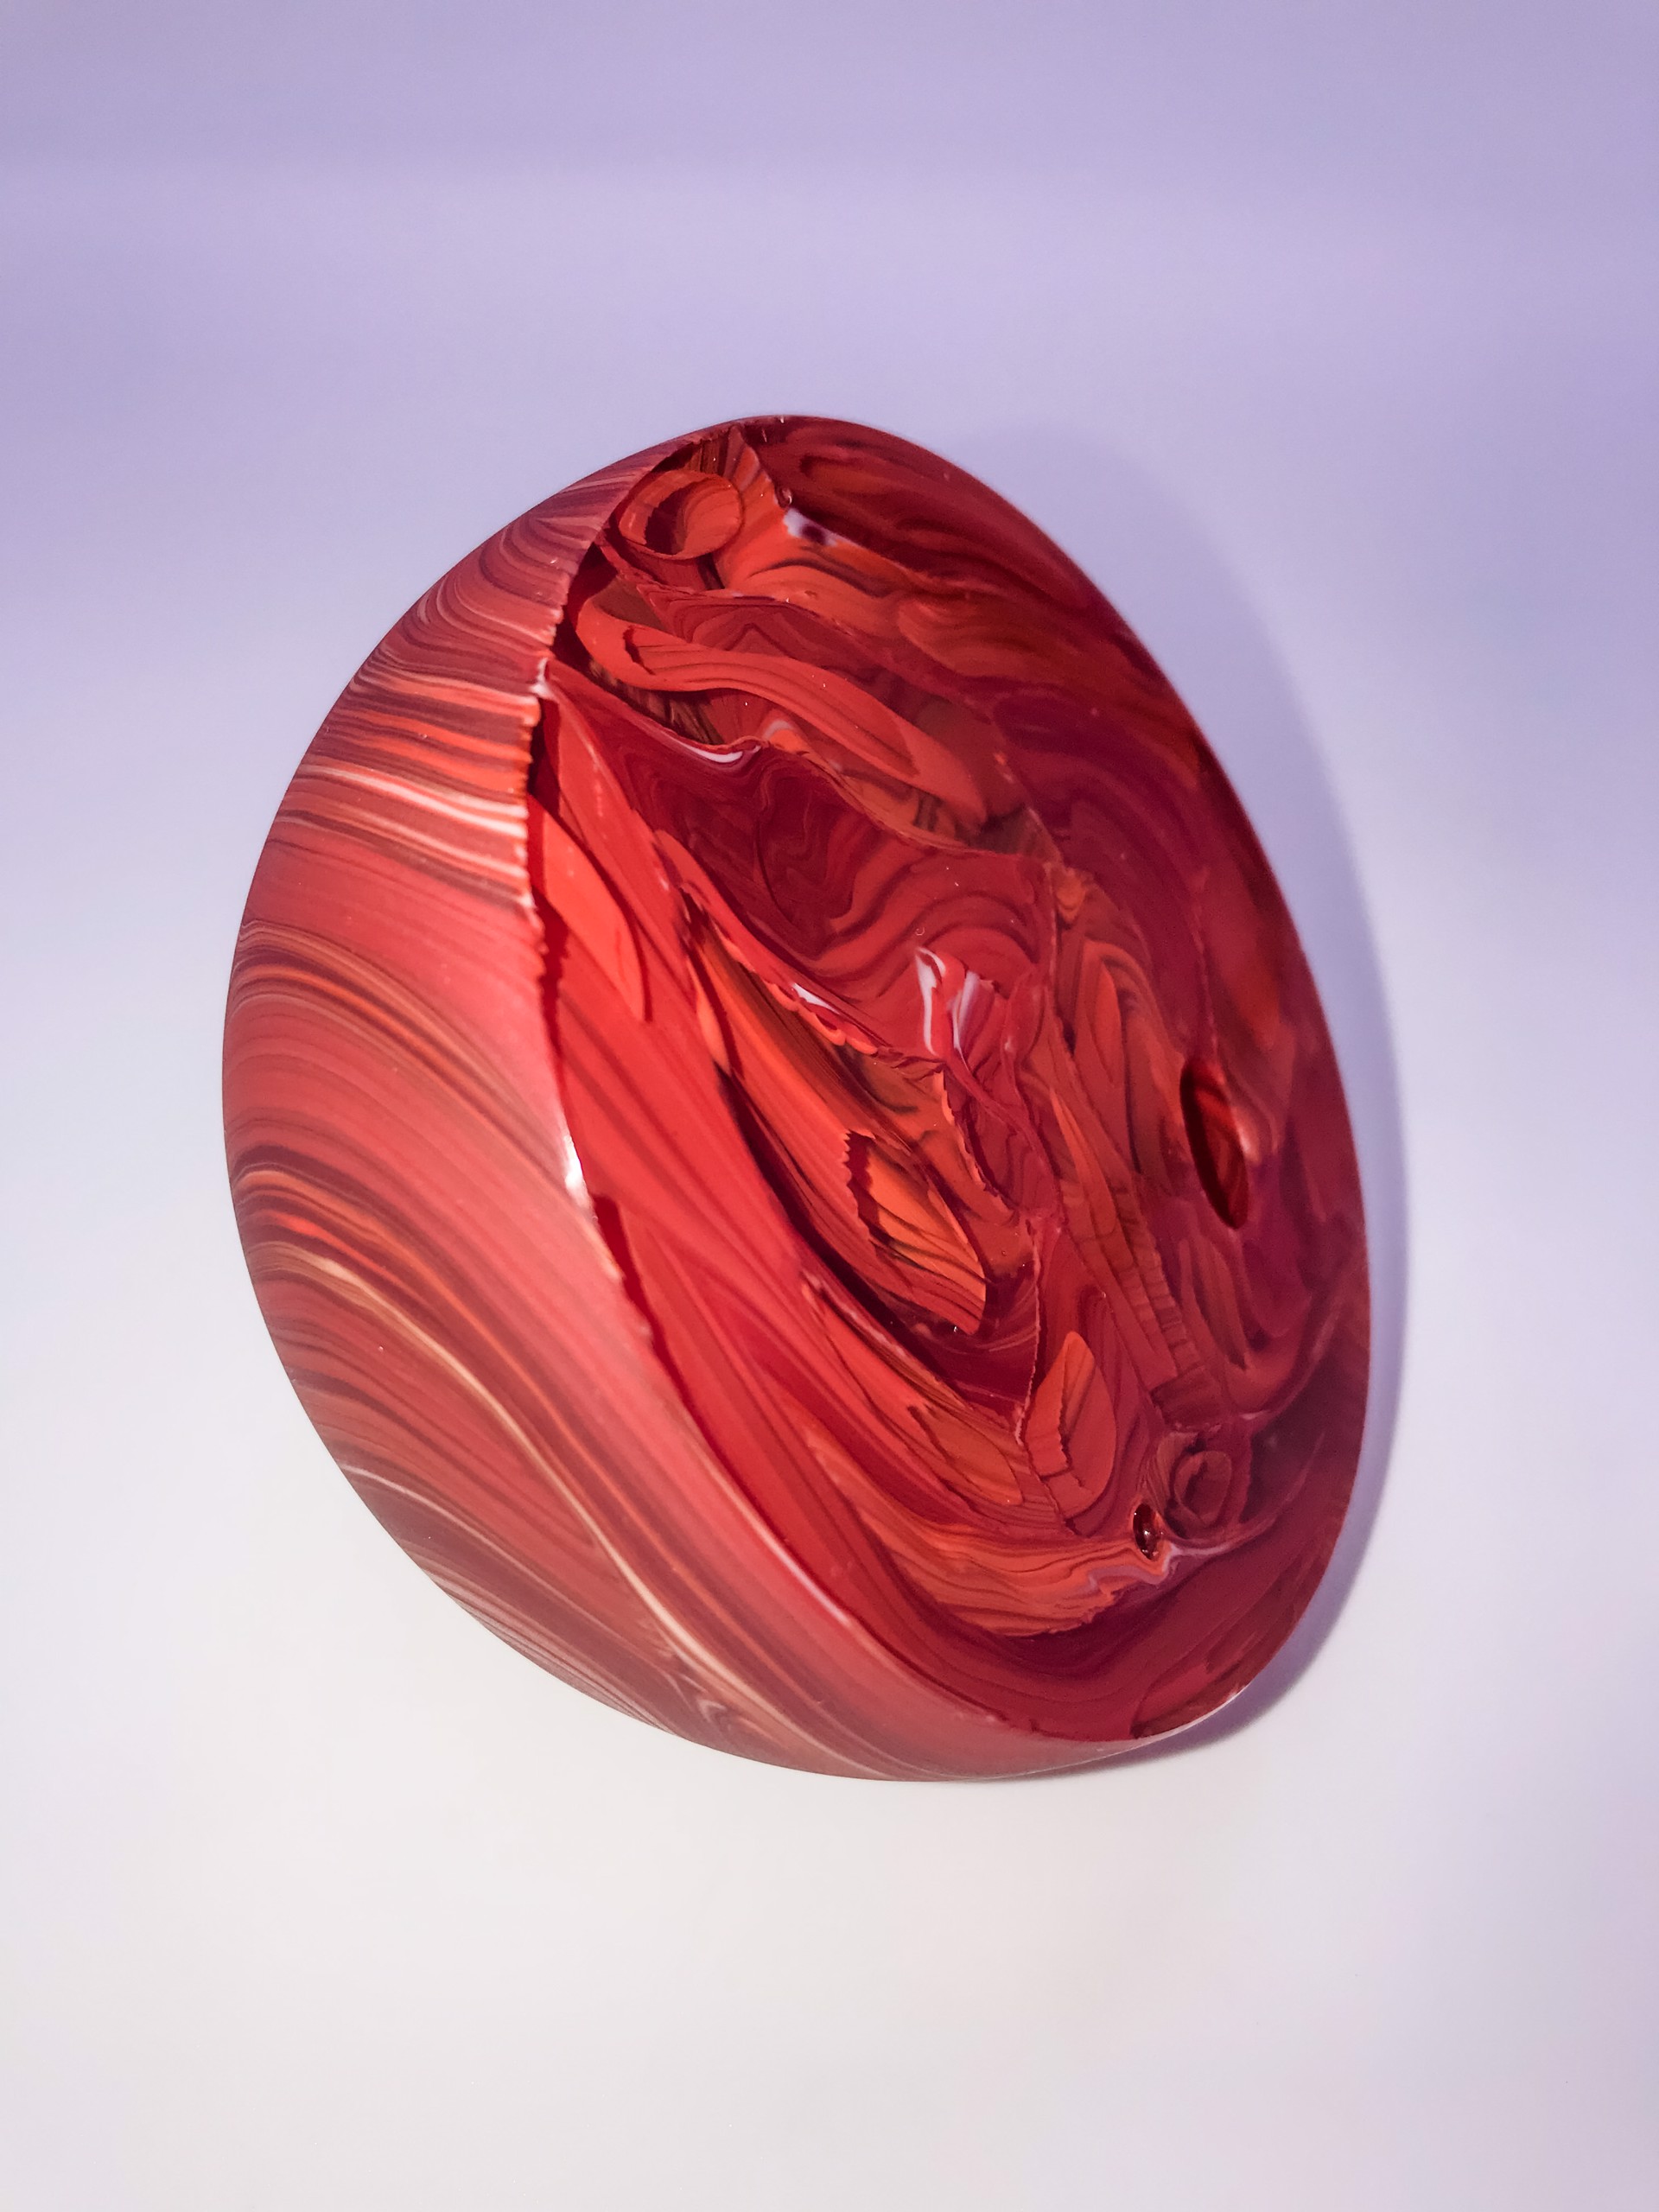 Cut and Polished Agate by Fred Kaemmer